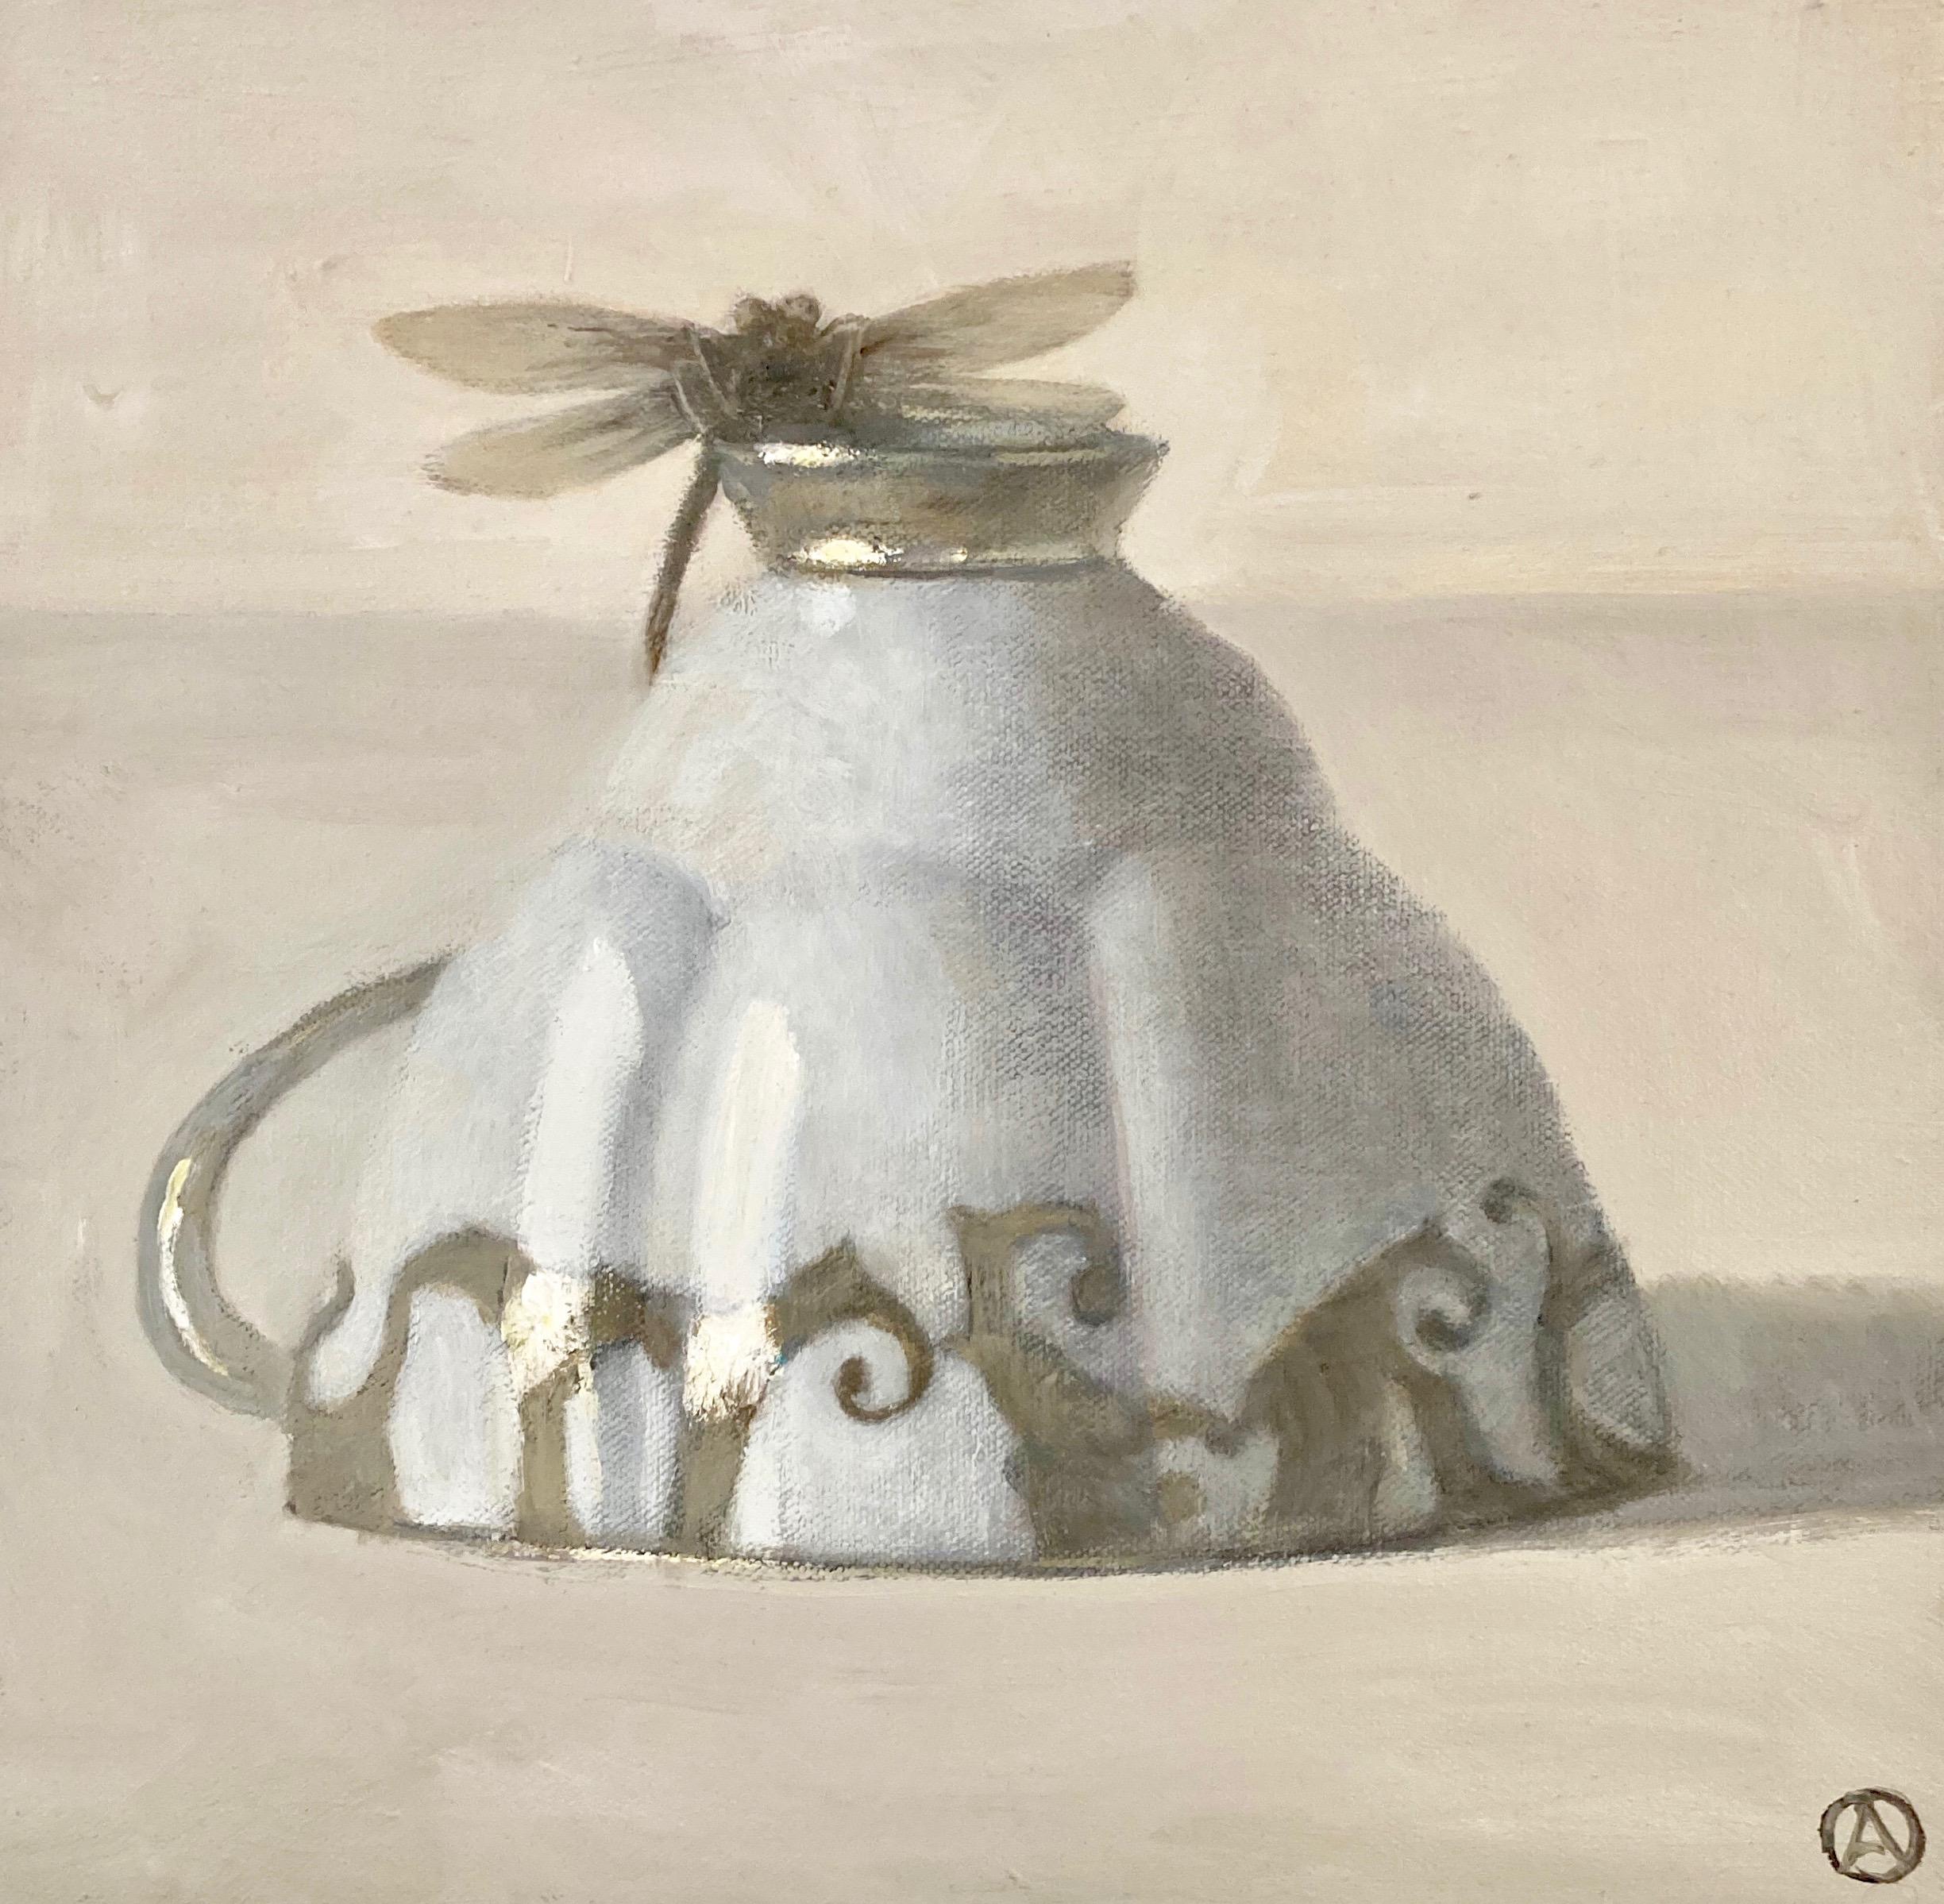 Olga Antonova Still-Life Painting - "Cup with Dragonfly" Tan, White and Silver Cup on Tan Ground with Gray Dragonfly